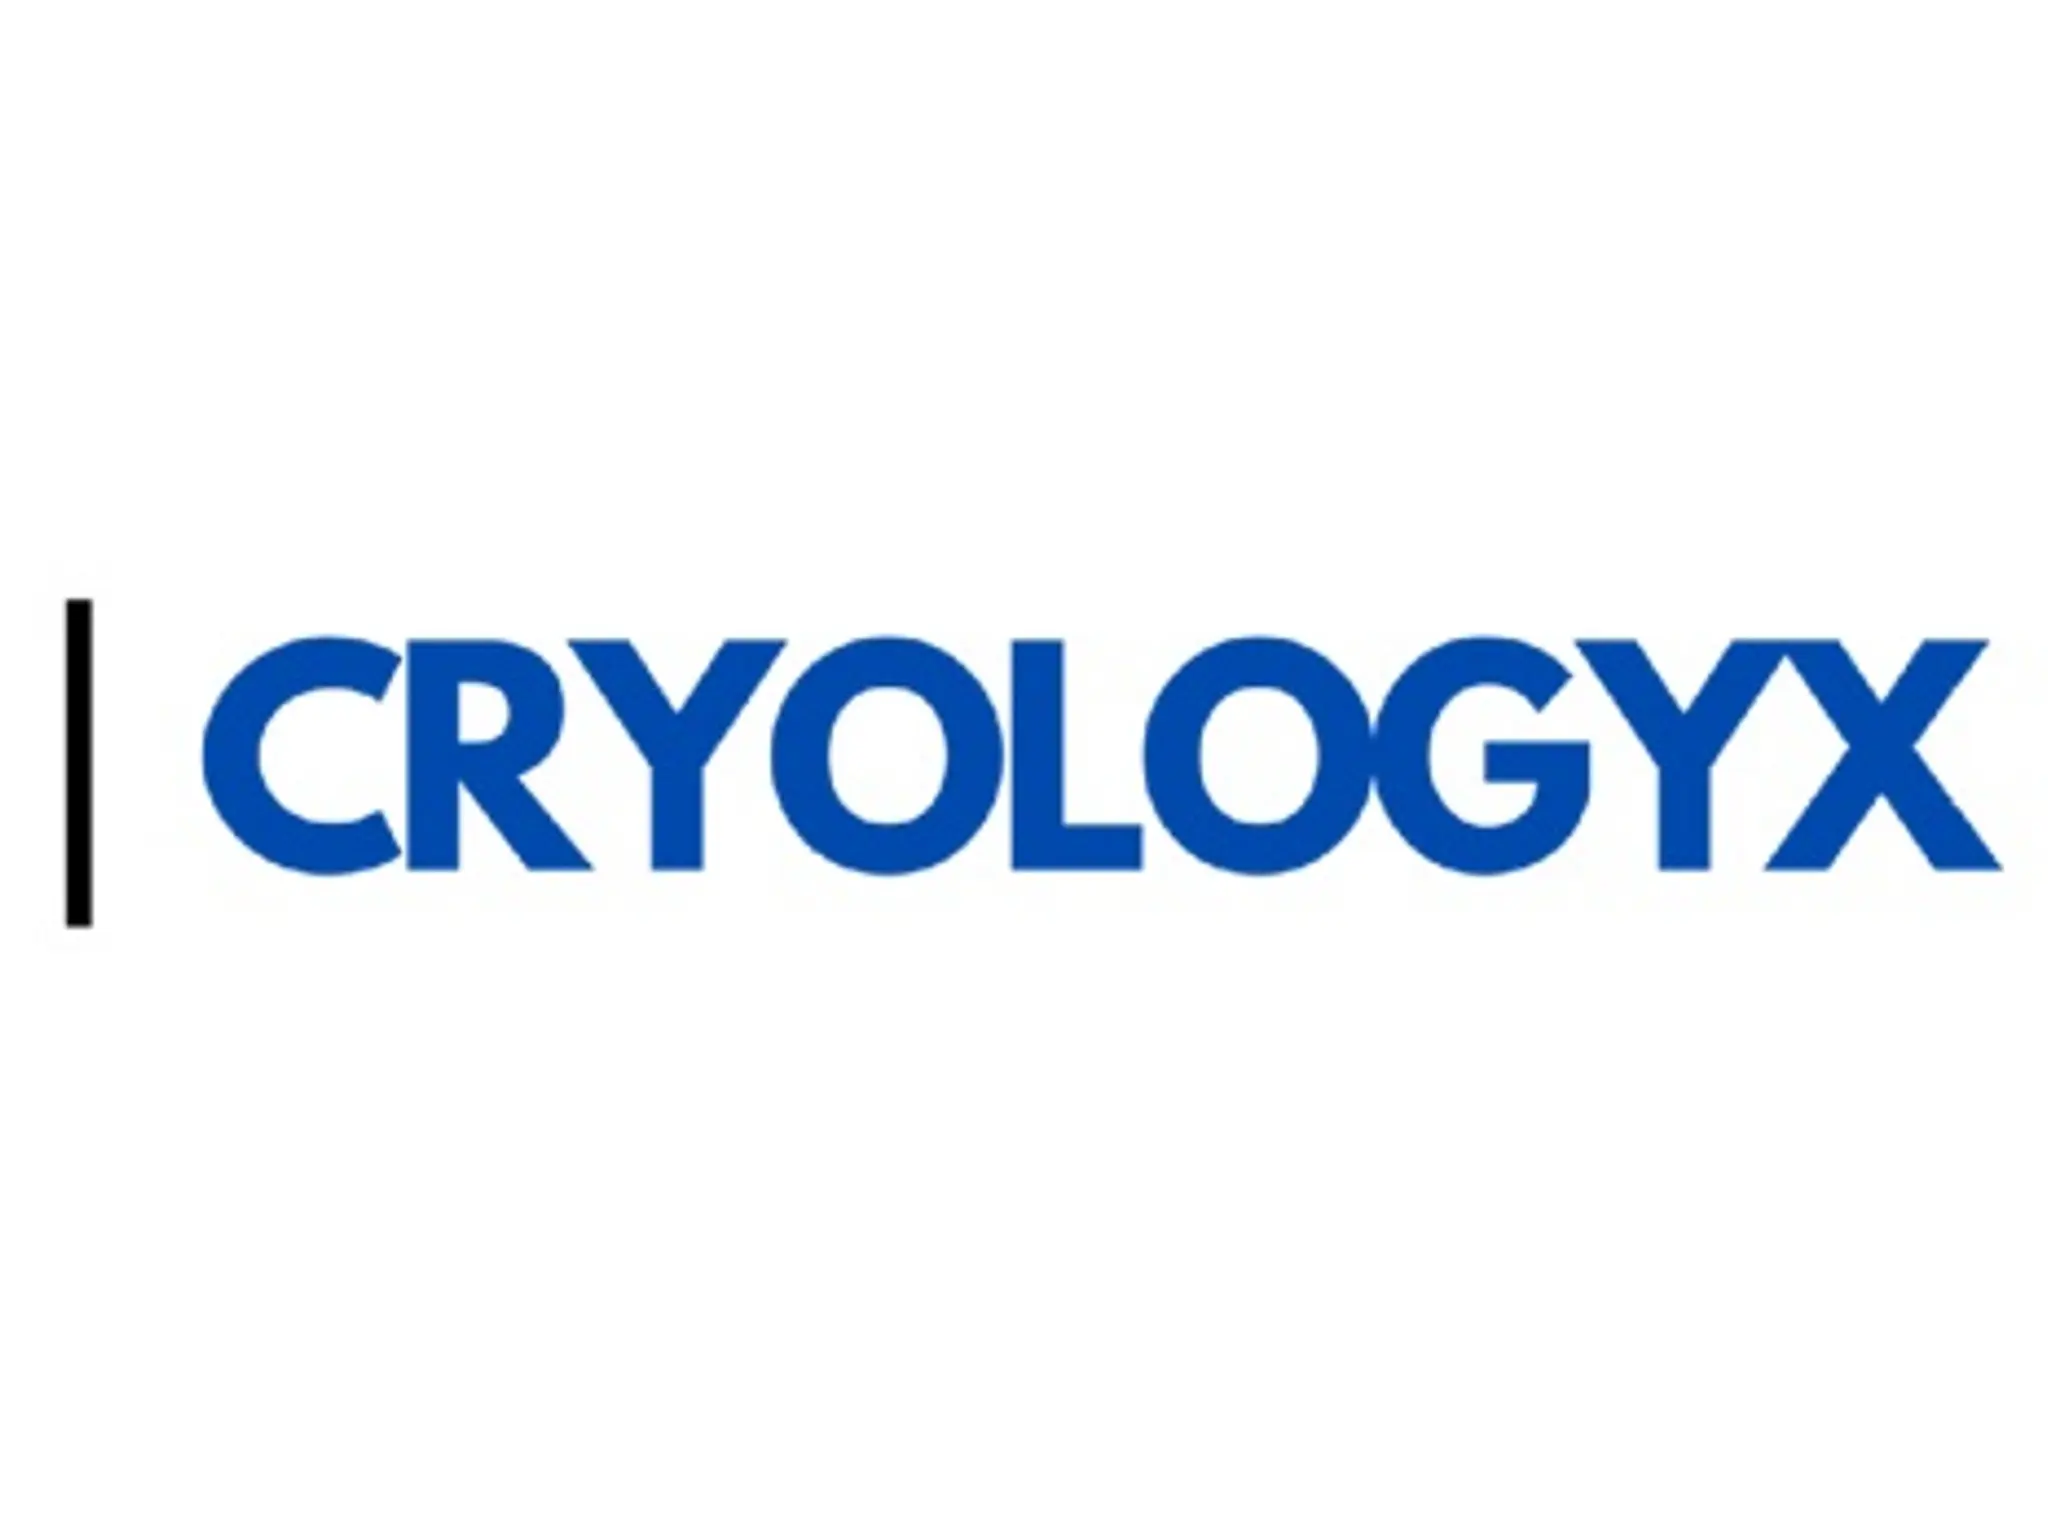  CryoLogyx Completes £500k Seed Funding Round 